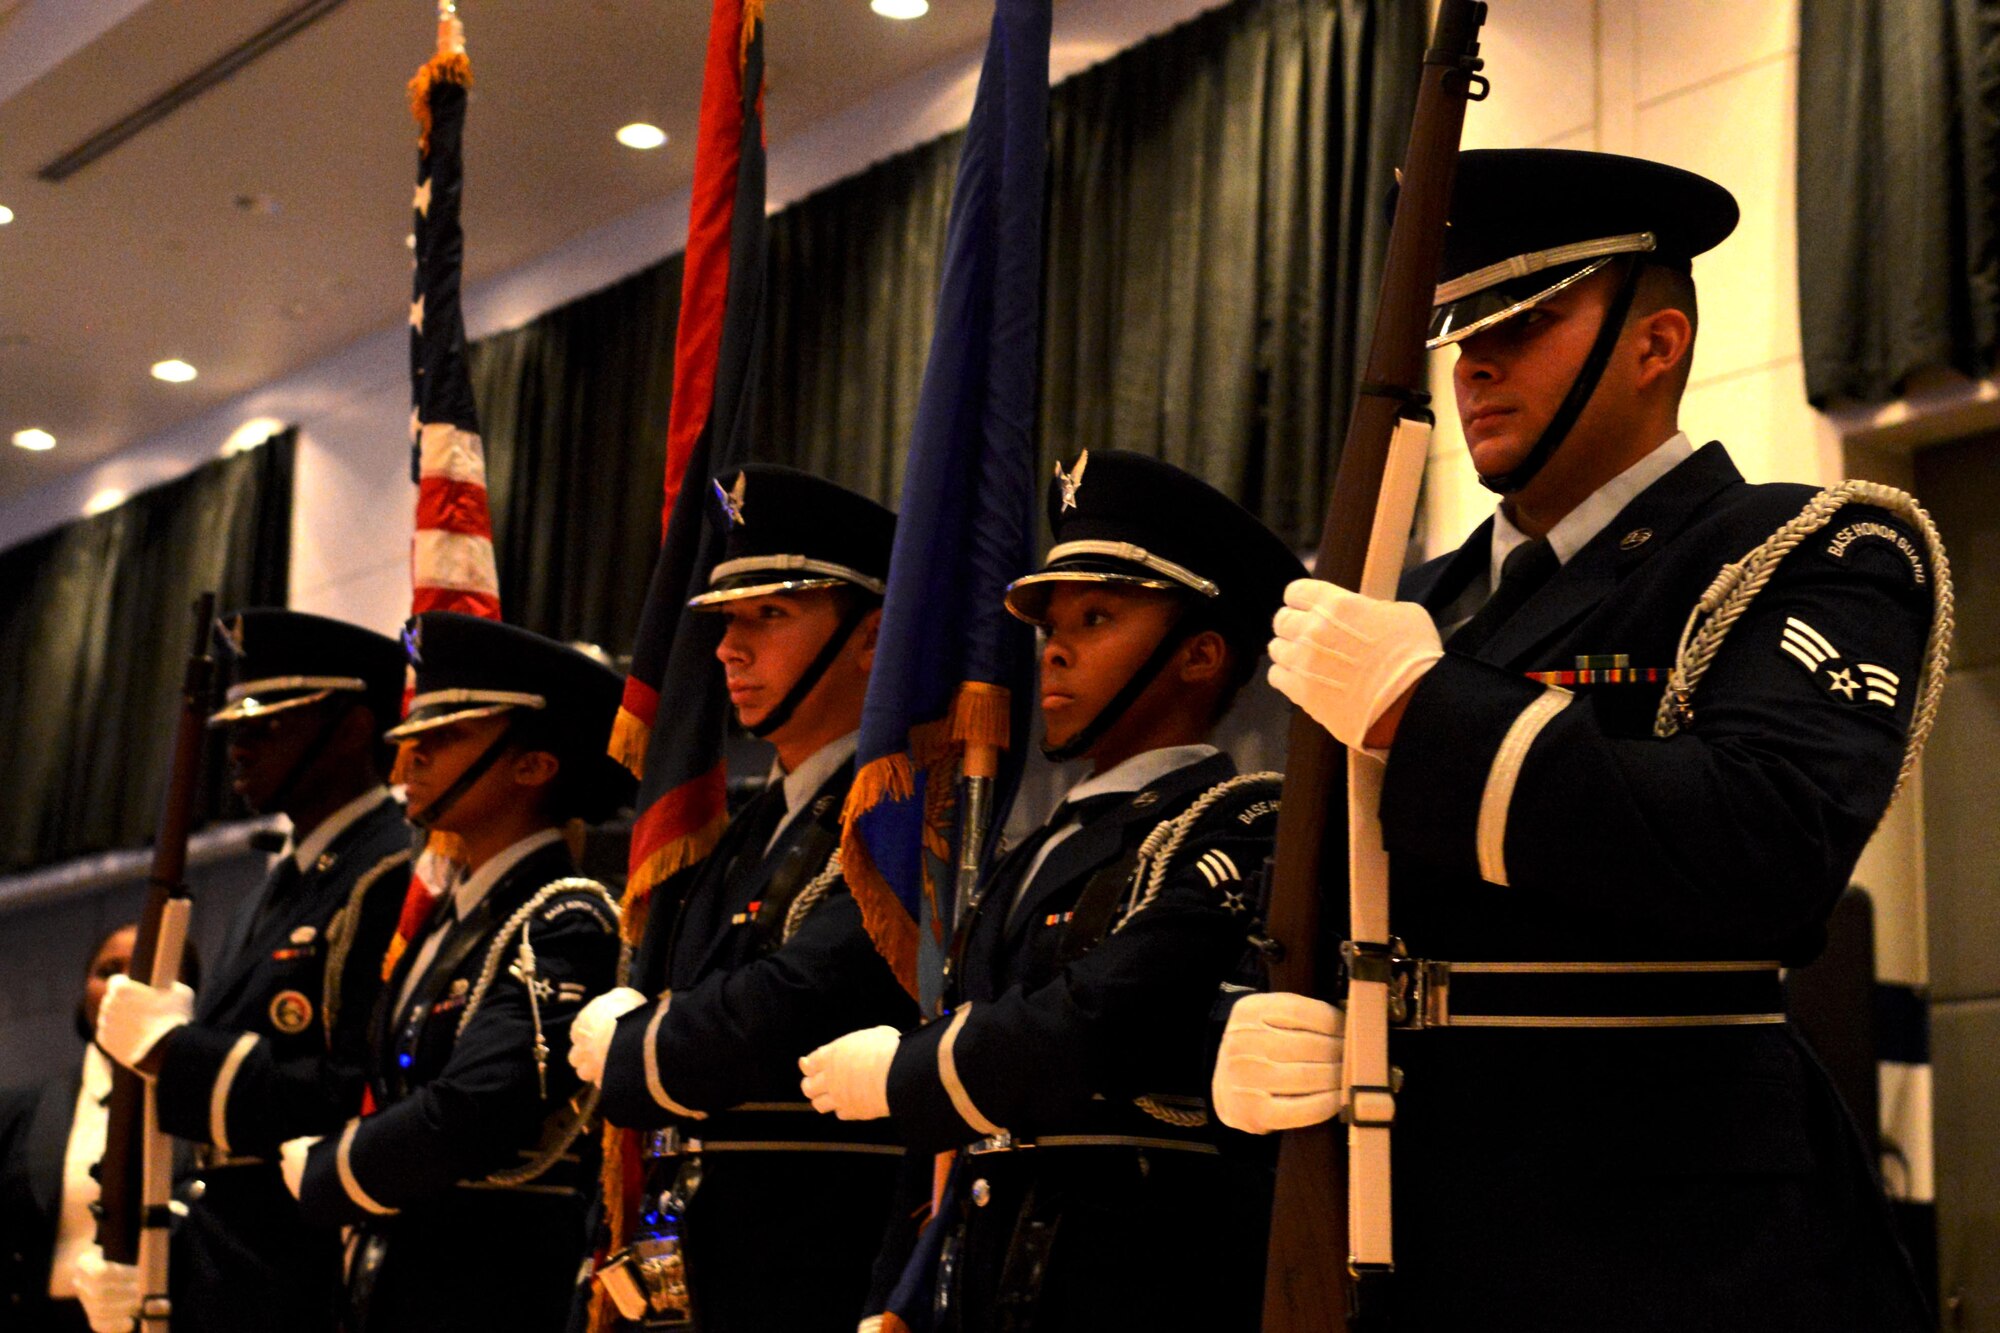 The Andersen Air Force Base Honor Guard presents the colors at the beginning of the 66th Annual Air Force Ball Sept. 20, 2013, at Leo Palace in Yona, Guam. The Air Force Ball celebrates the creation of the U.S. Air Force as an independent service in 1947, when the Air Force separated from the U.S. Army. (U.S. Air Force Photo by Airman 1st Class Emily A. Bradley/Released)